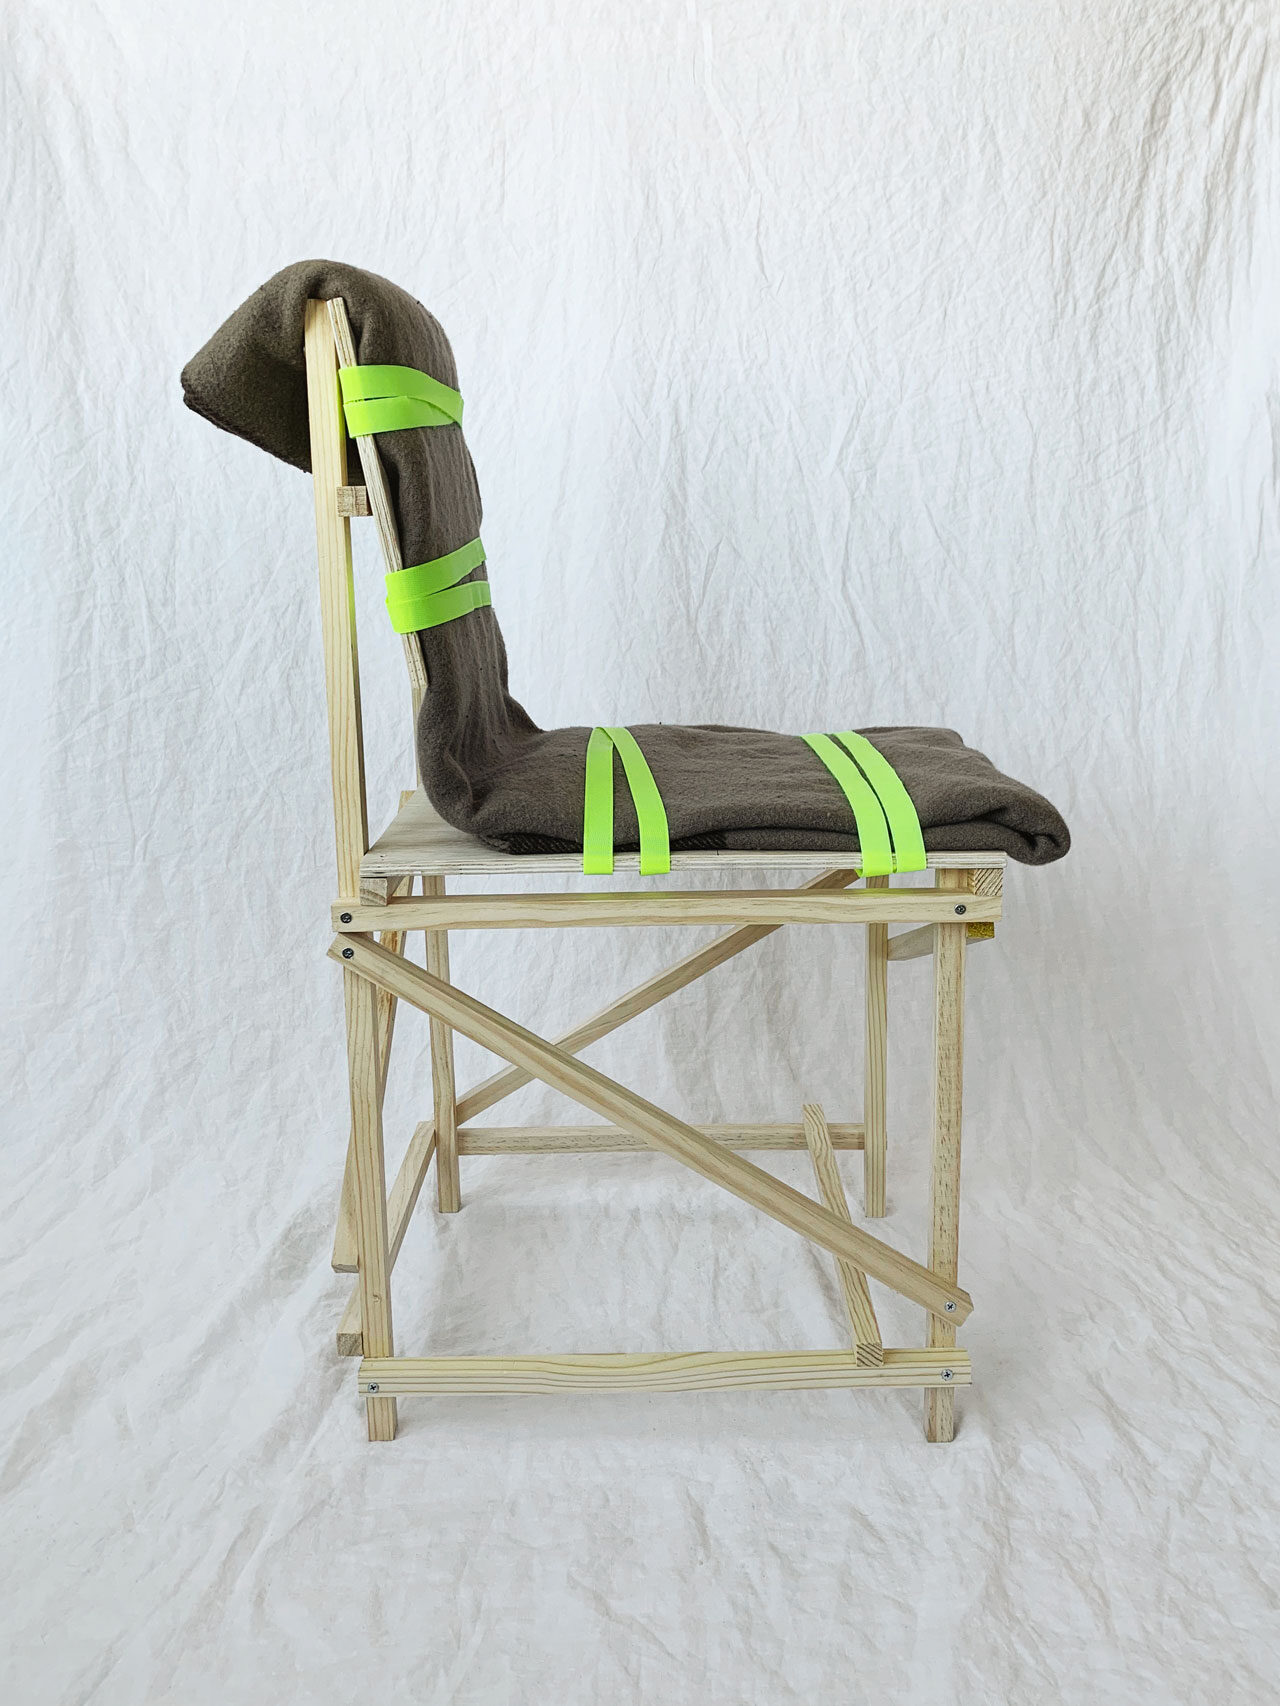 Rough And Ready DIY Chair by Tord Boontje